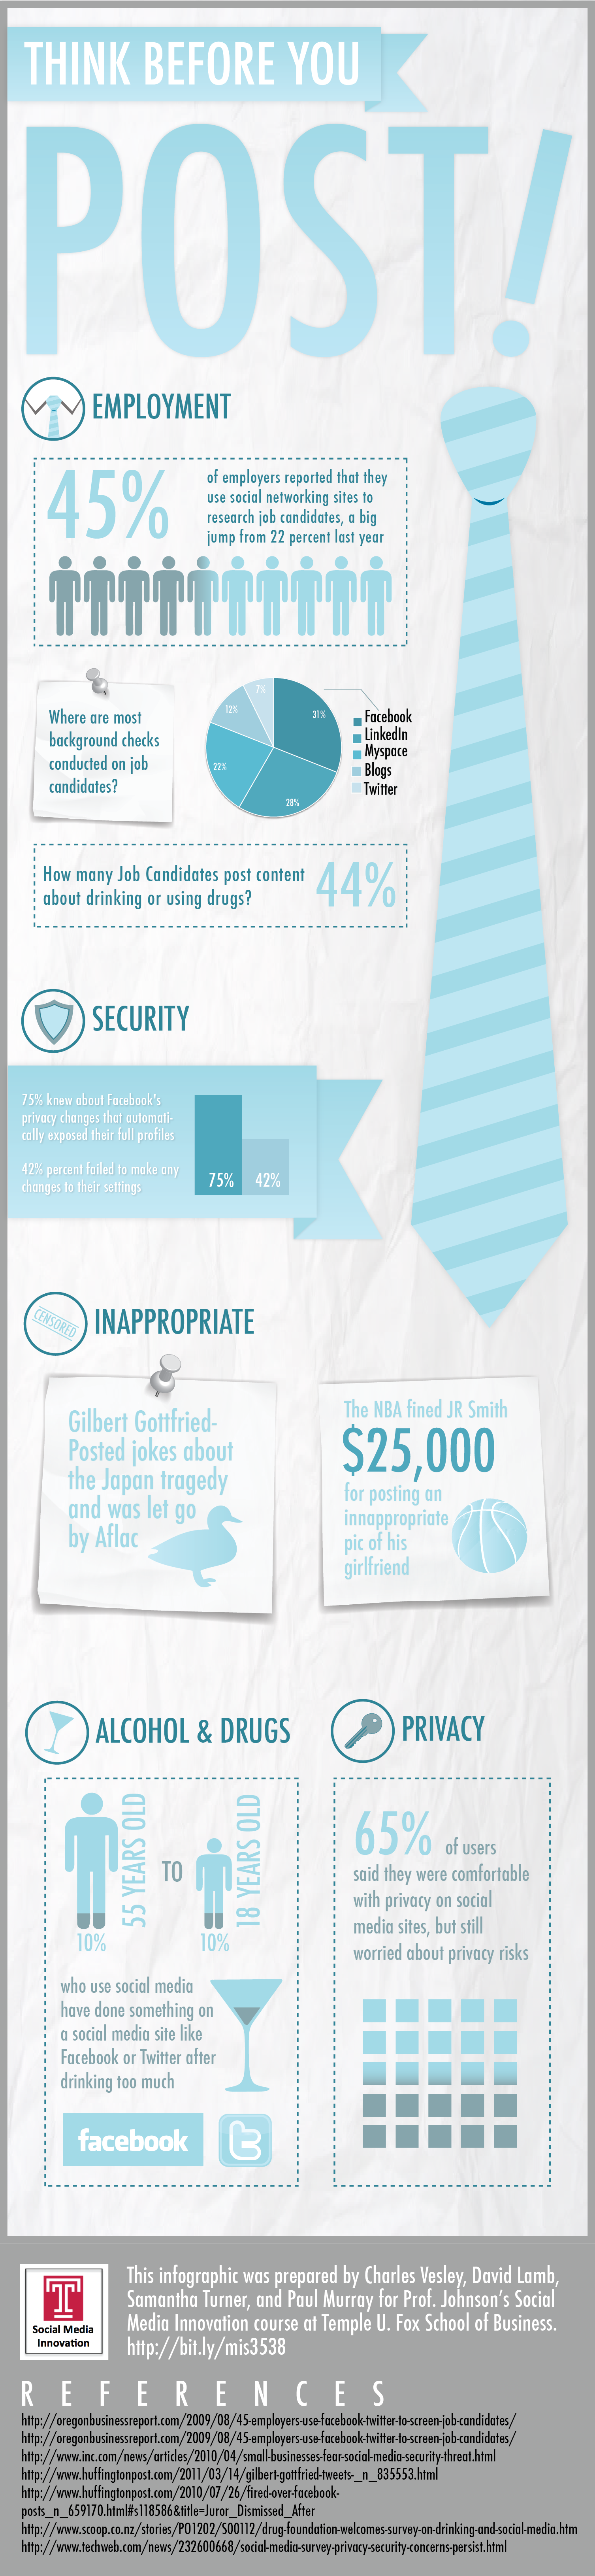 Think Before You Post: Job Background Checks [Infographic]